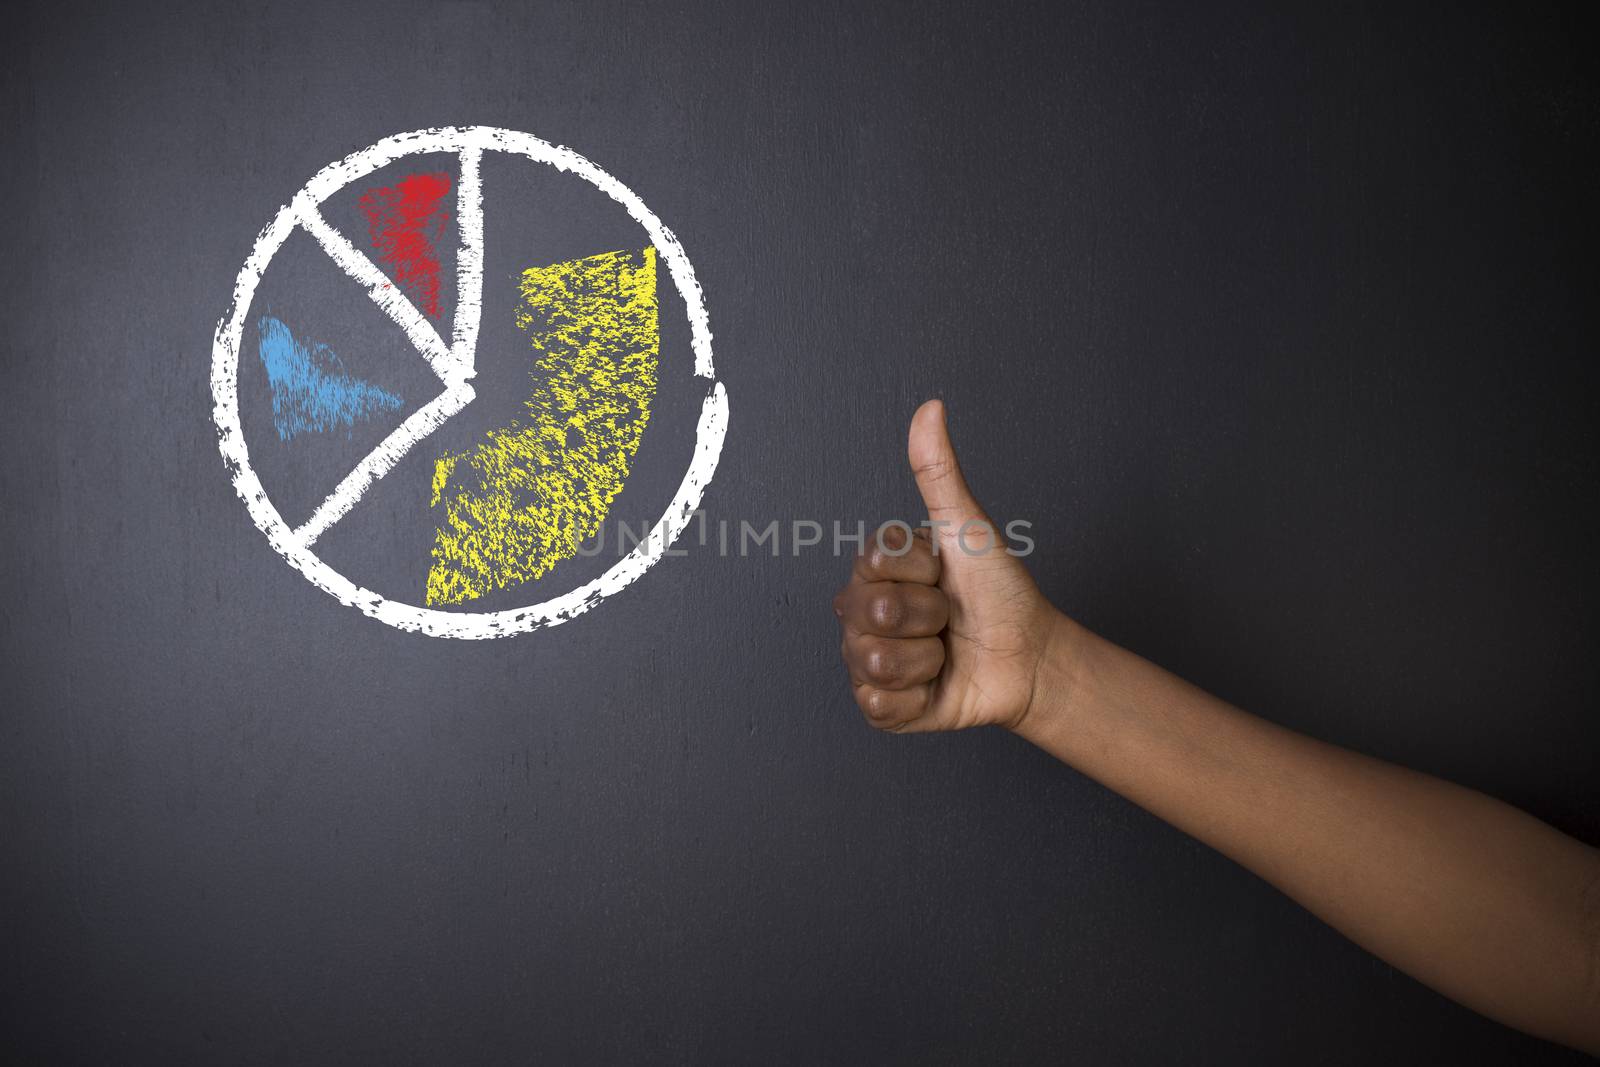 South African or African American teacher or student thumbs up against blackboard chalk pie graph or chart by alistaircotton